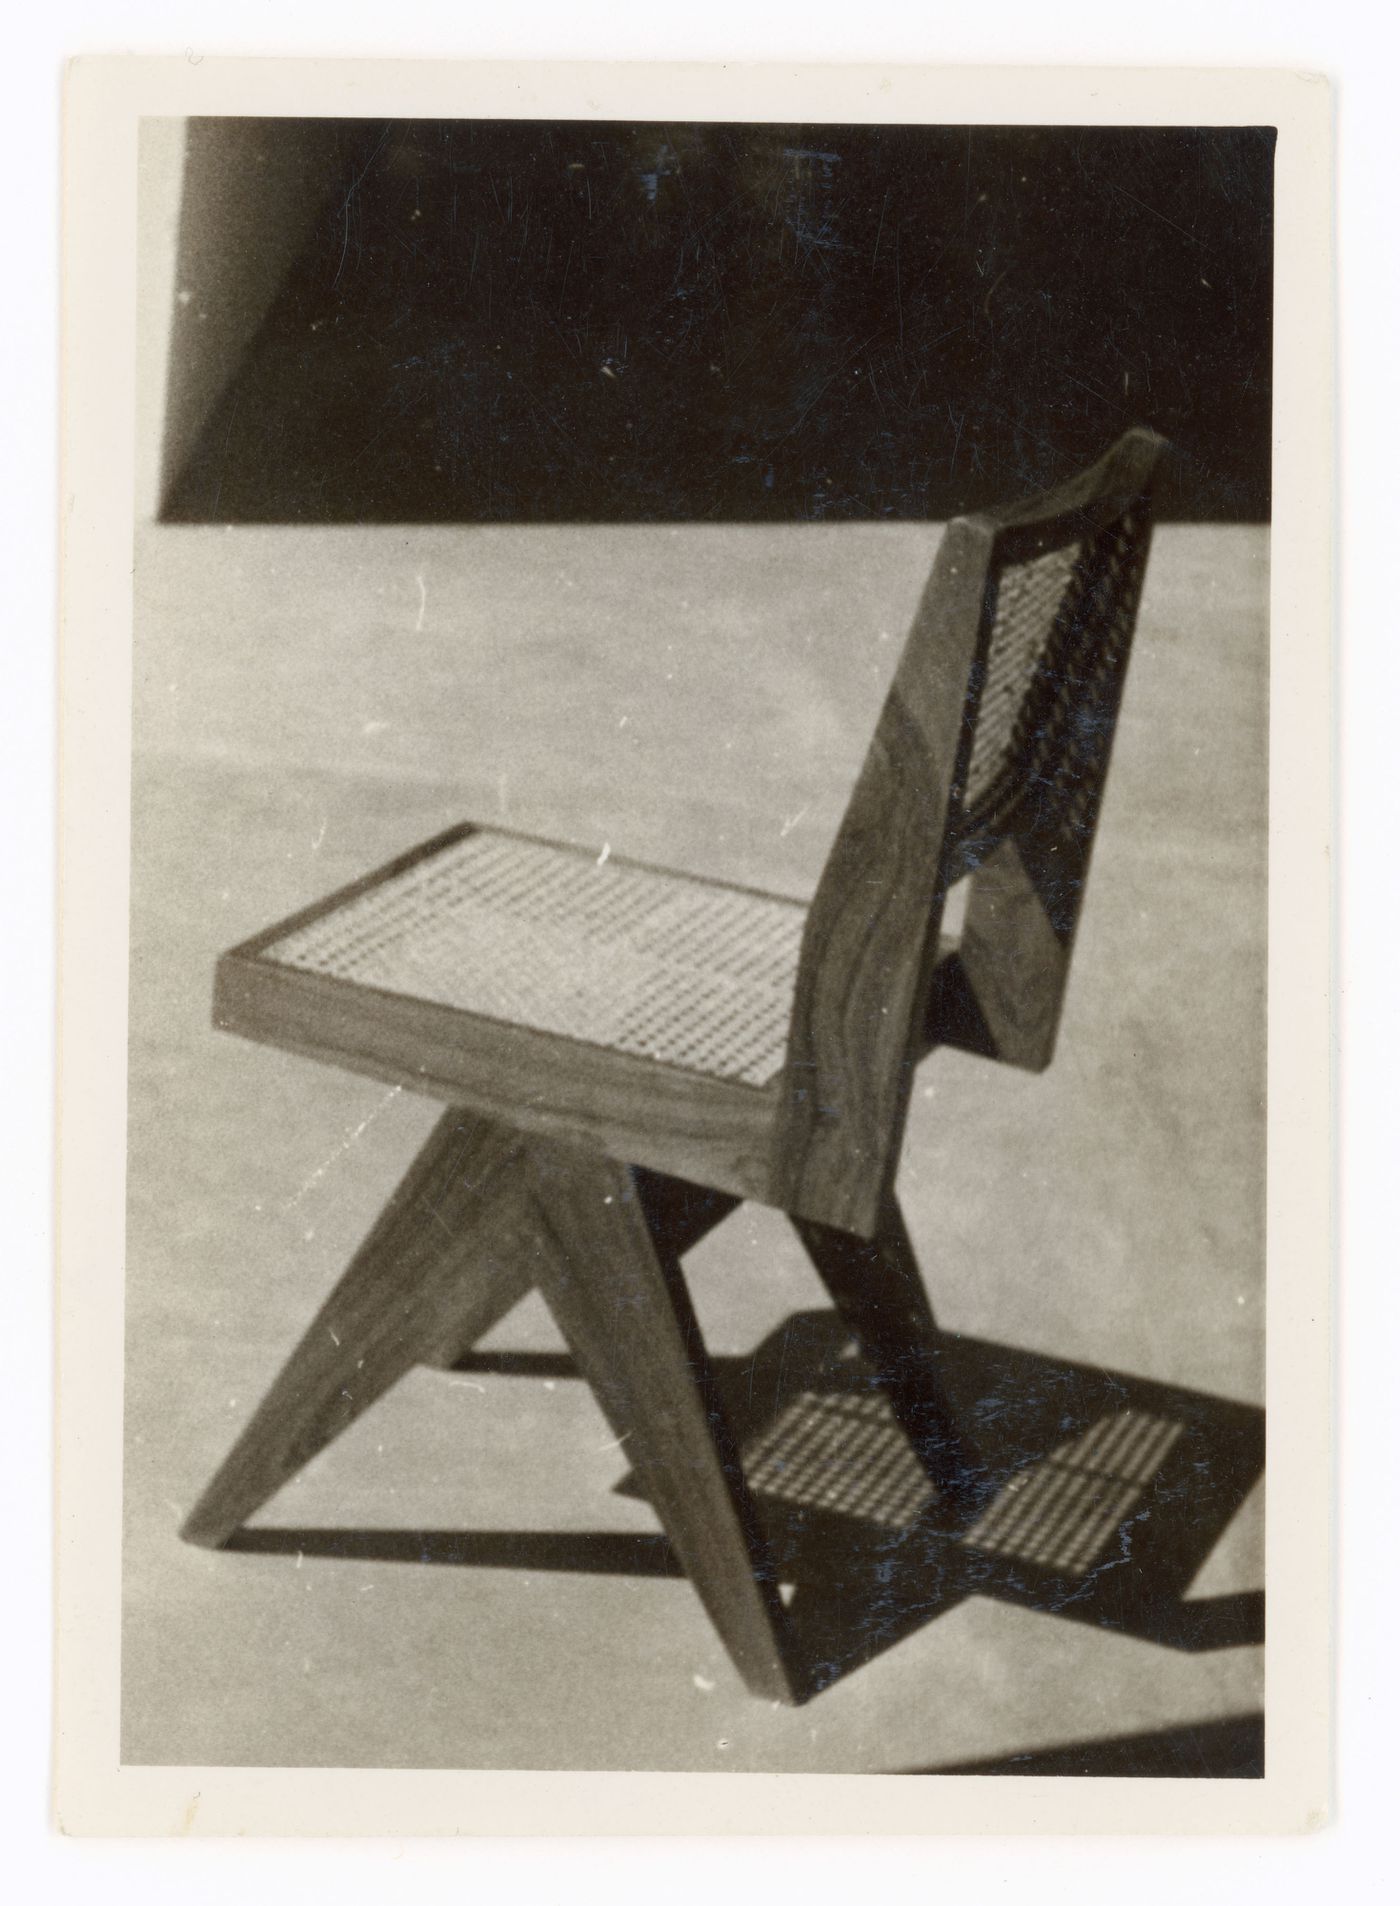 View of a chair designed by Pierre Jeanneret, Chandigarh, India